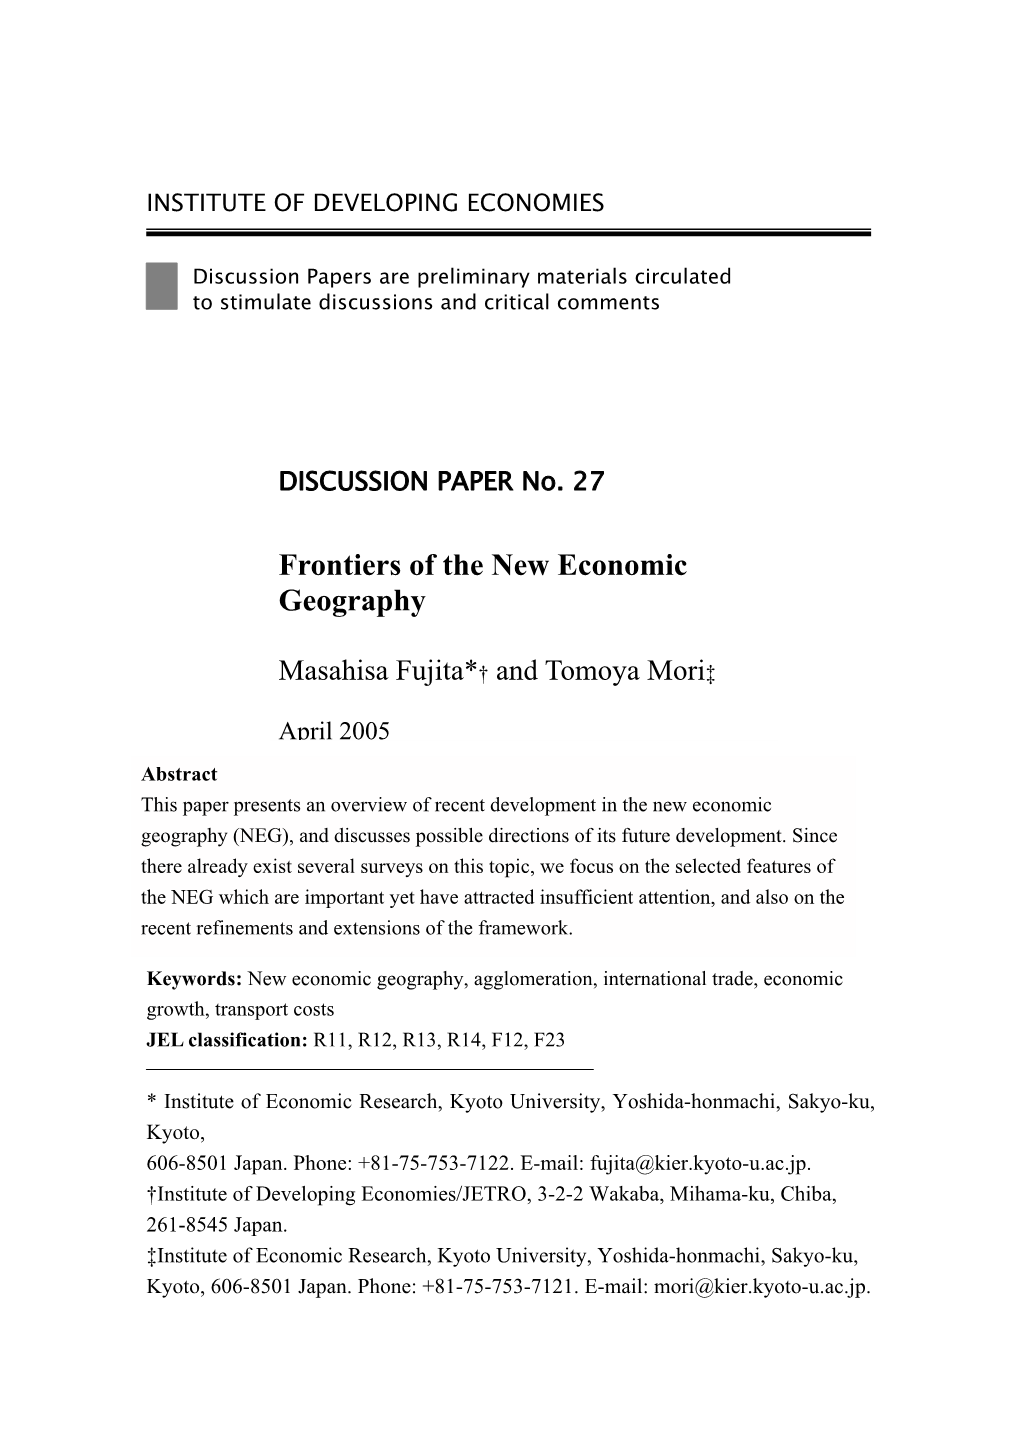 Frontiers of the New Economic Geography